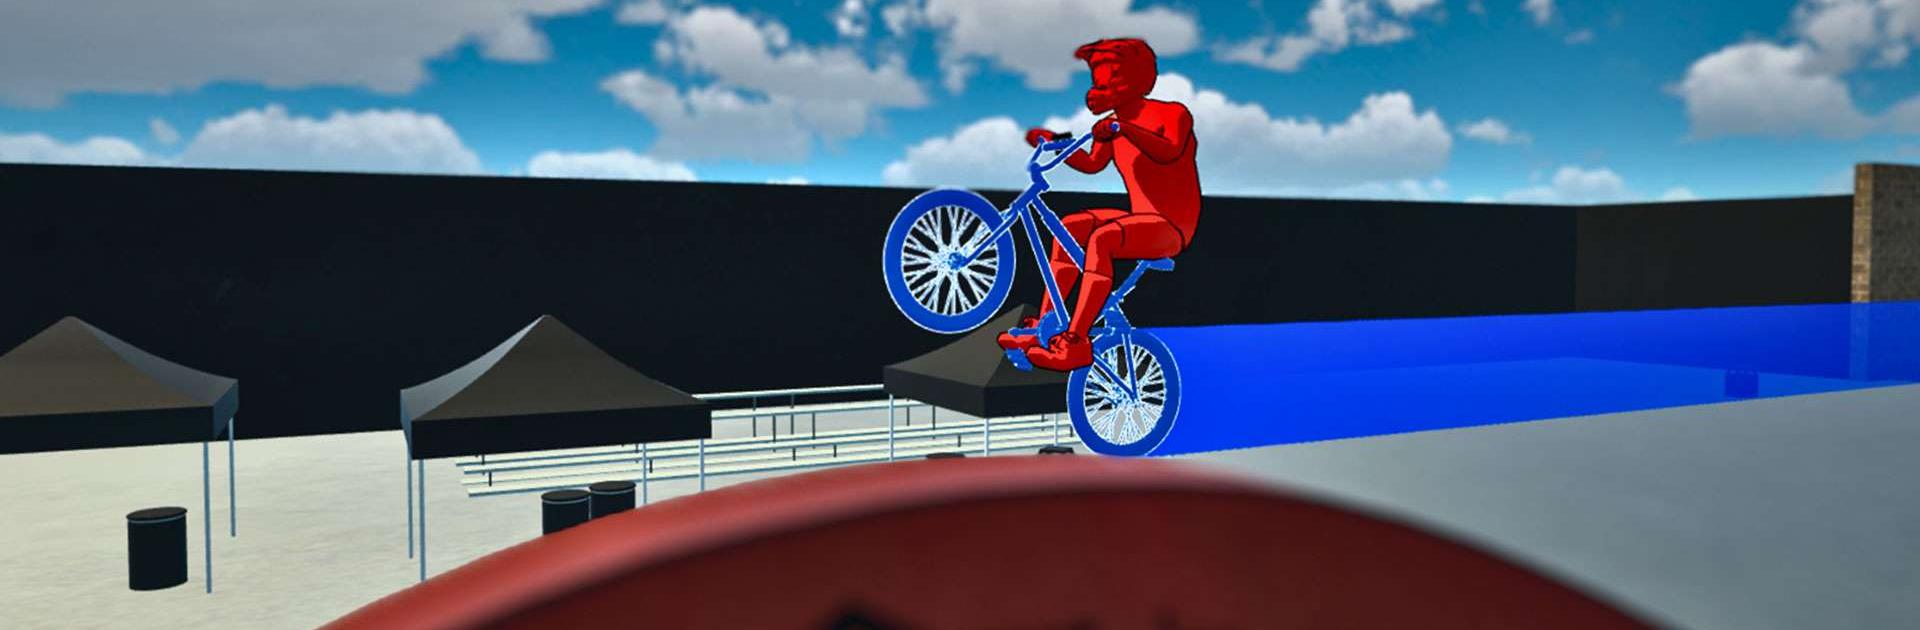 Bicycle Extreme Rider 3D